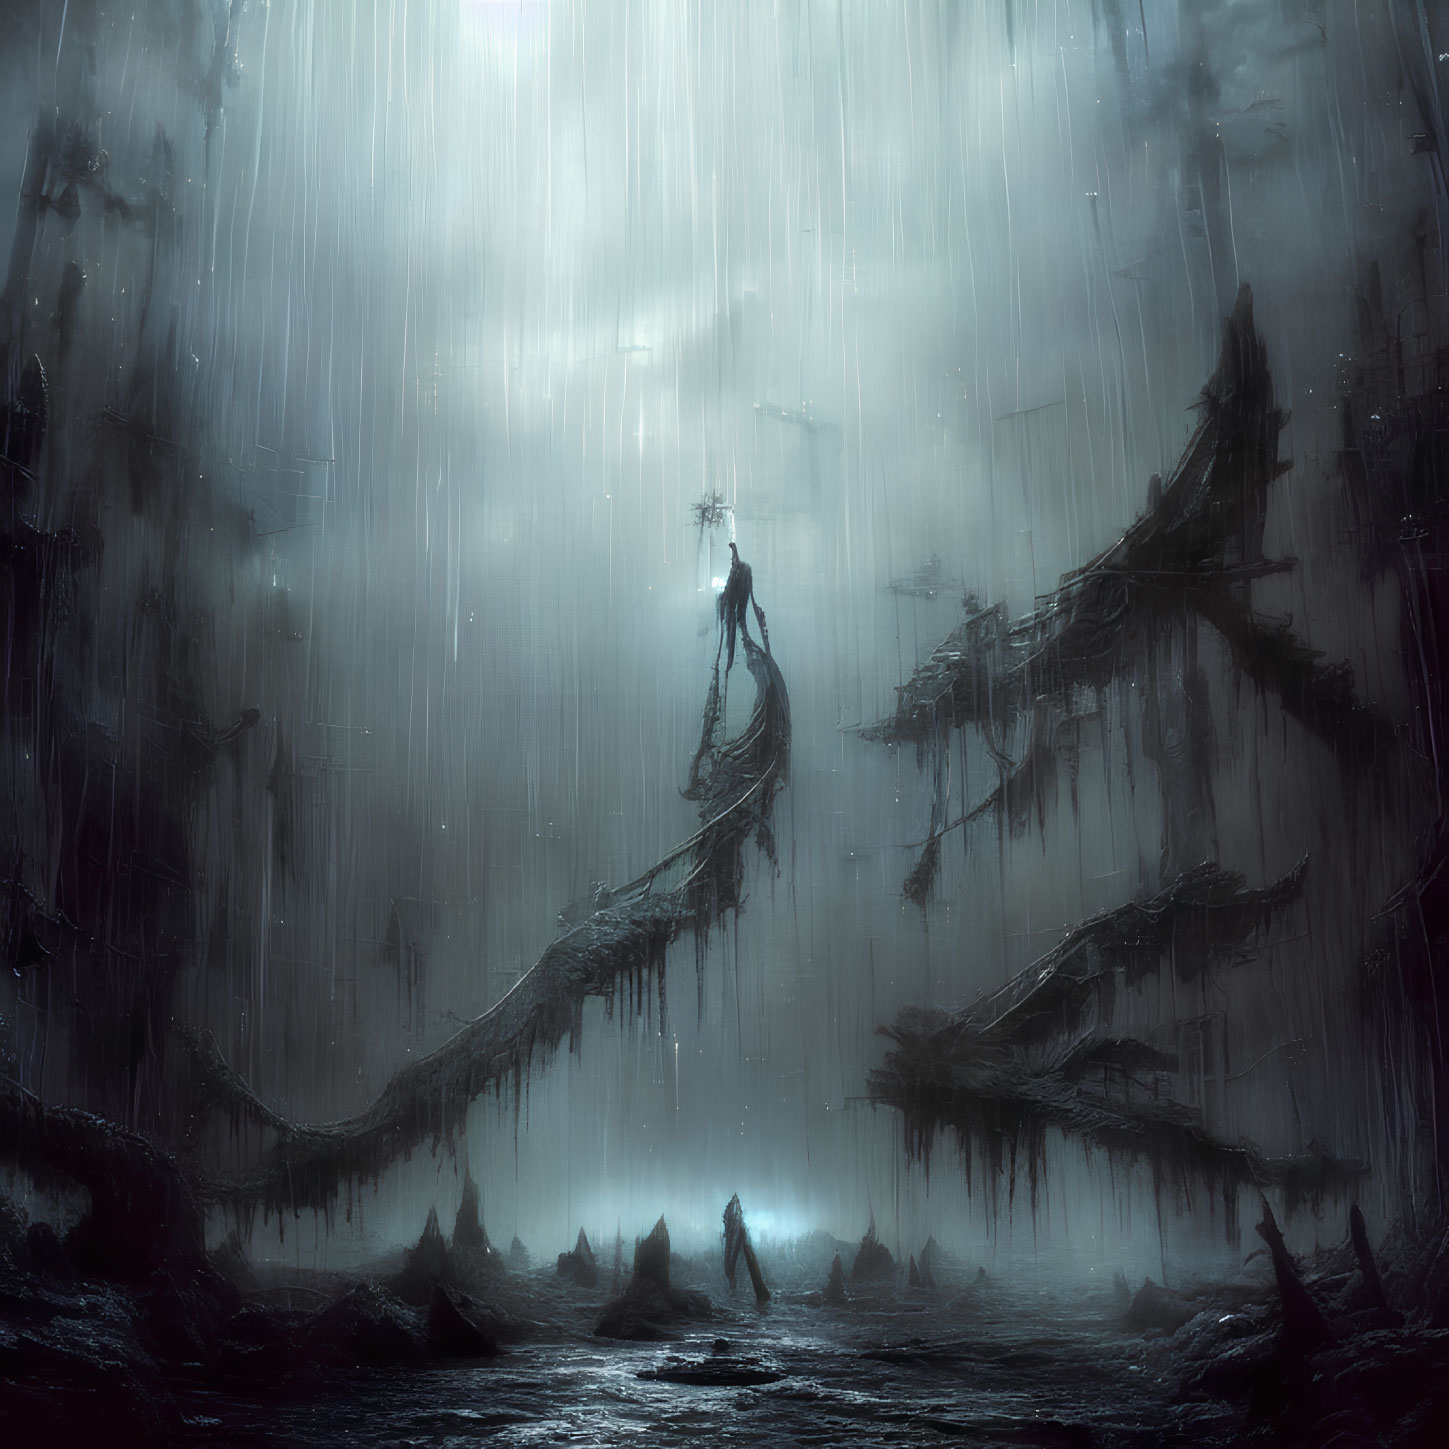 Mysterious figure in rainy, ominous landscape with ethereal presence